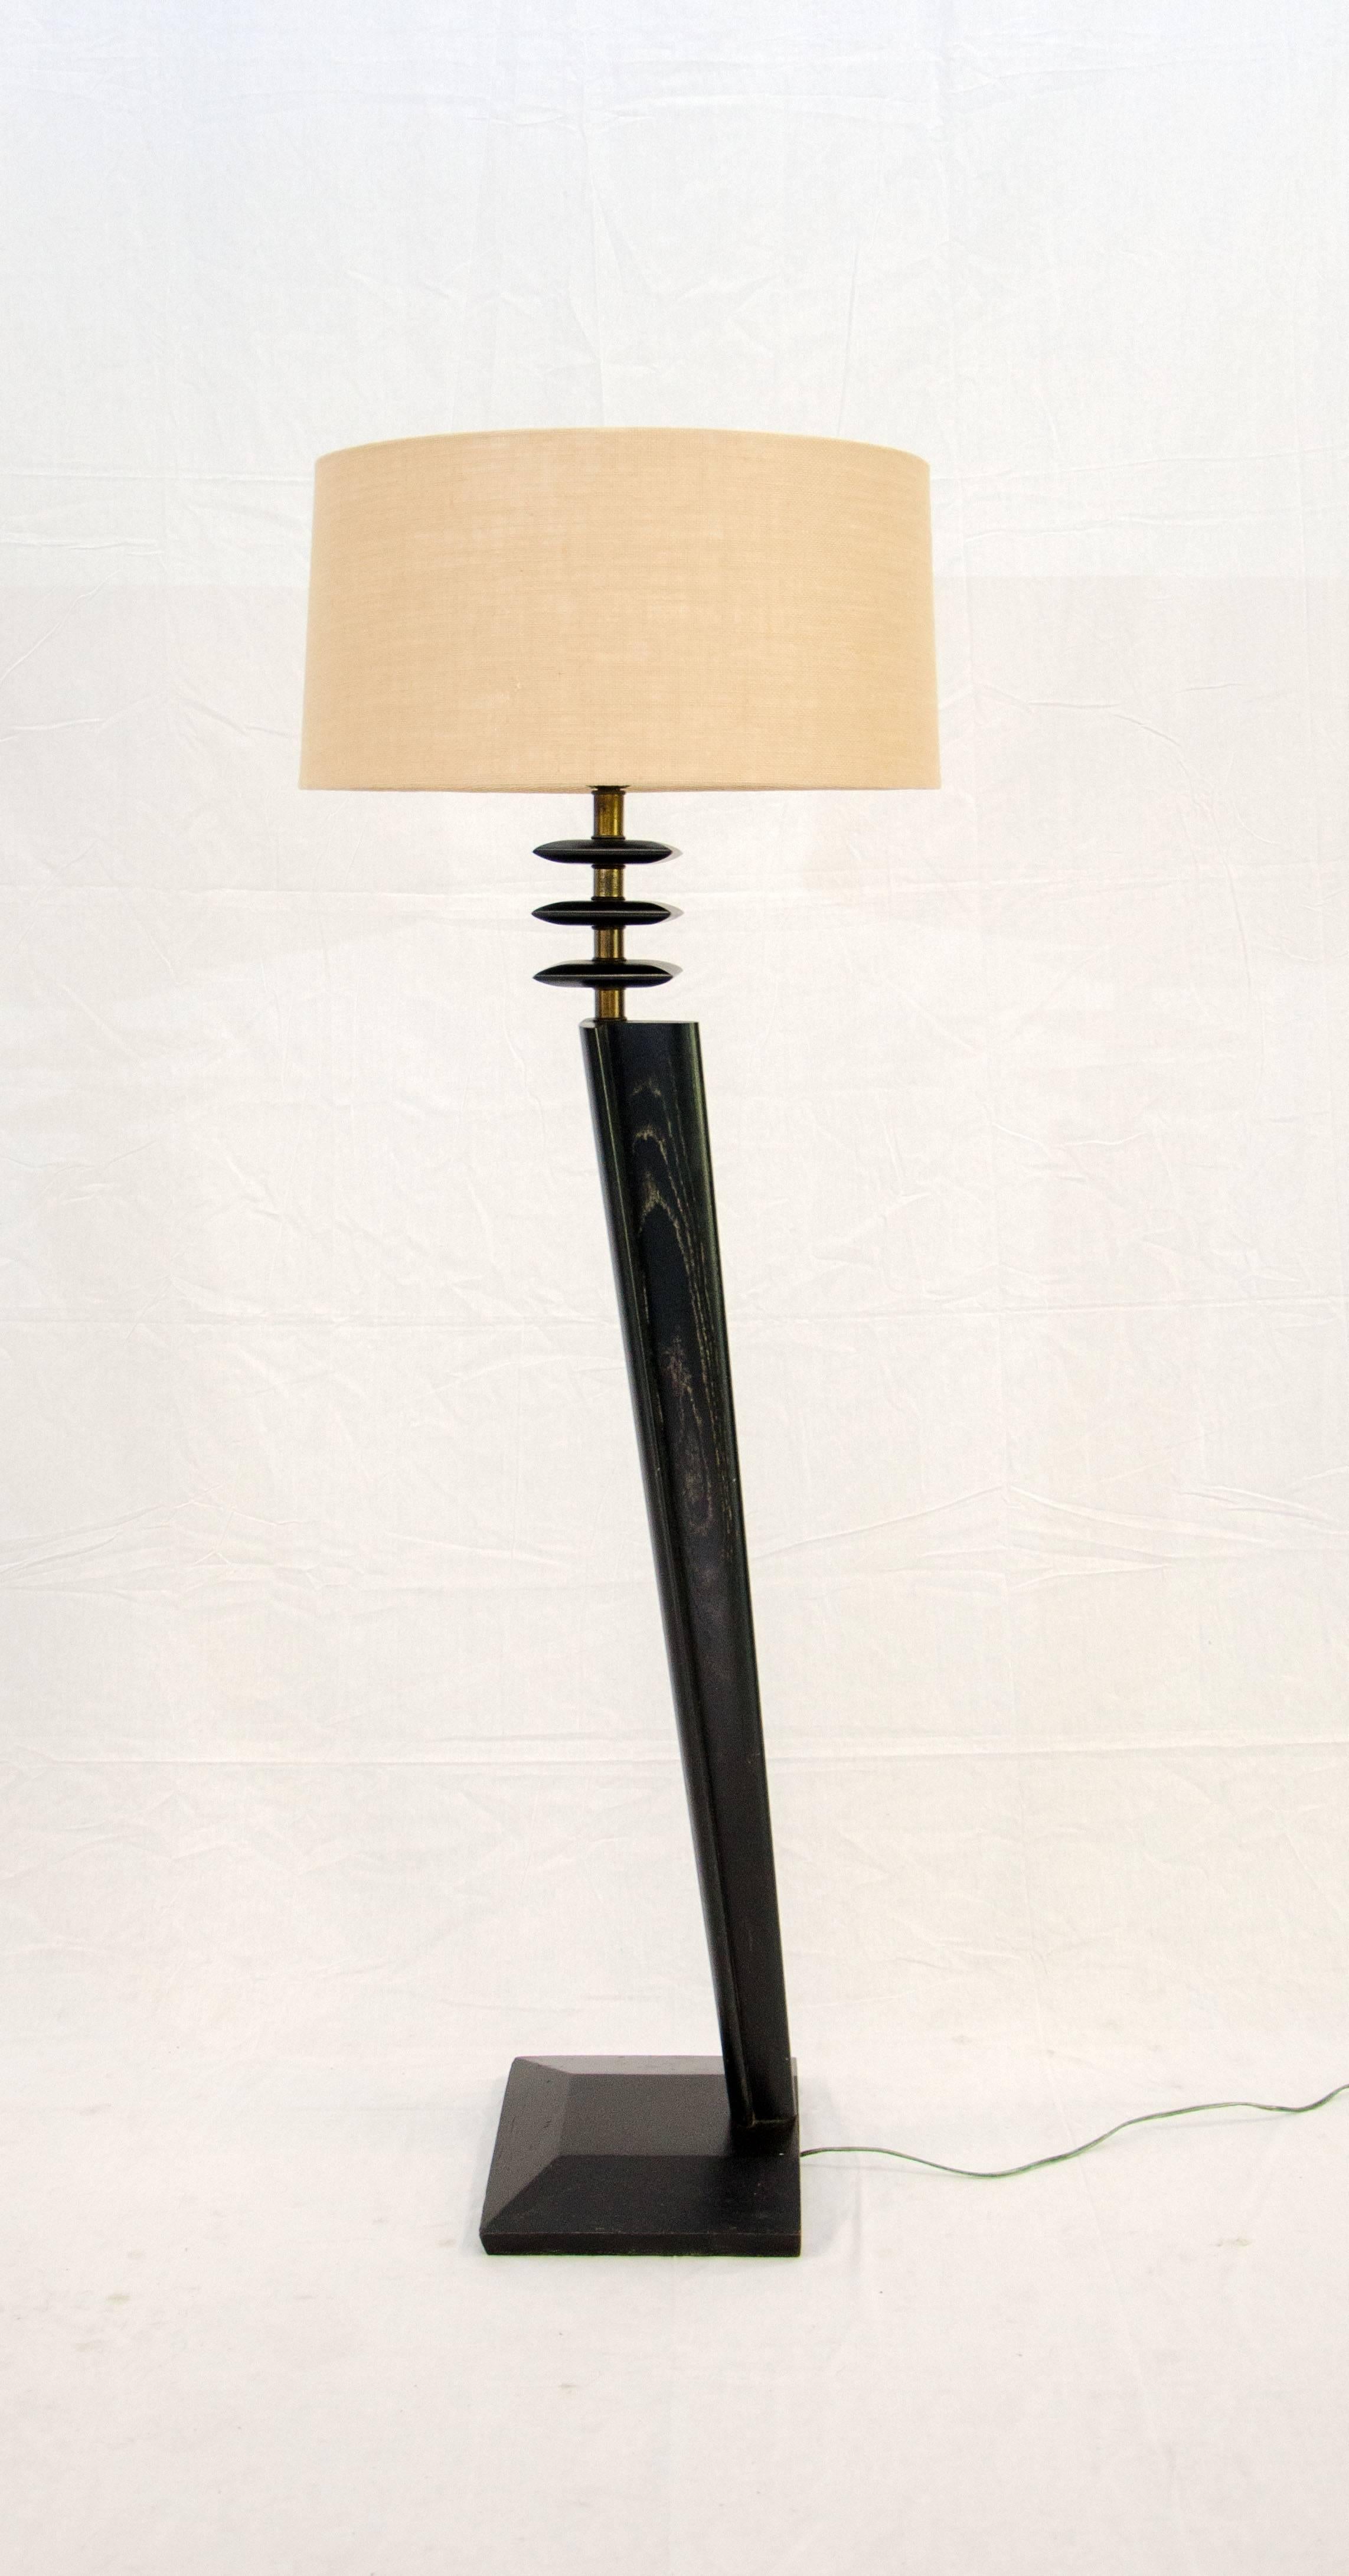 This floor lamp has an unusual angular design the main post slants upward from just one side of the rather than being centered on the base. The lamp is accented by three square wooden pieces with a brass post between them. The new lightweight burlap